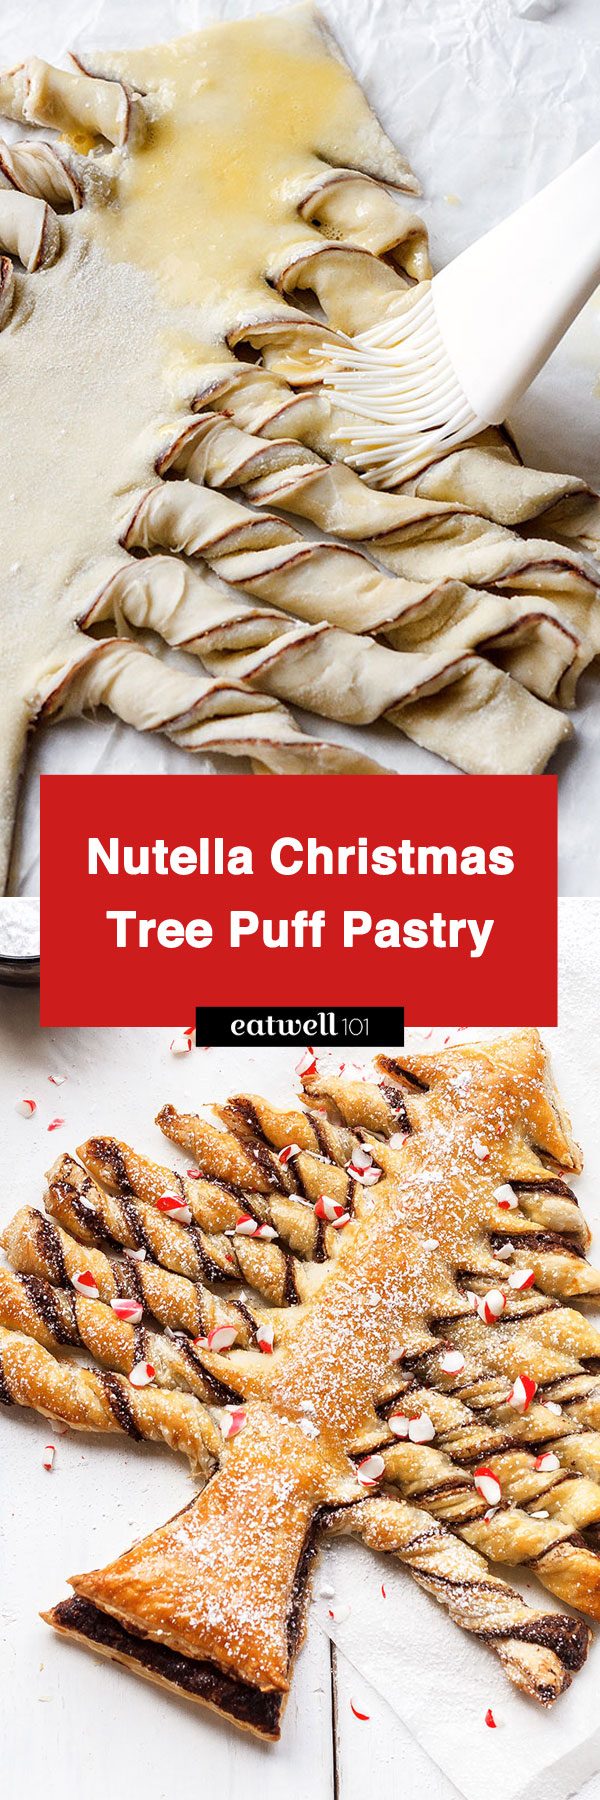 Nutella Christmas Tree Puff Pastry - #Nutella #Christmas #tree #recipe #eatwell101 - Crunchy and super indulgent, a show-stopping treat that everyone will love! Ideal for Christmas parties.